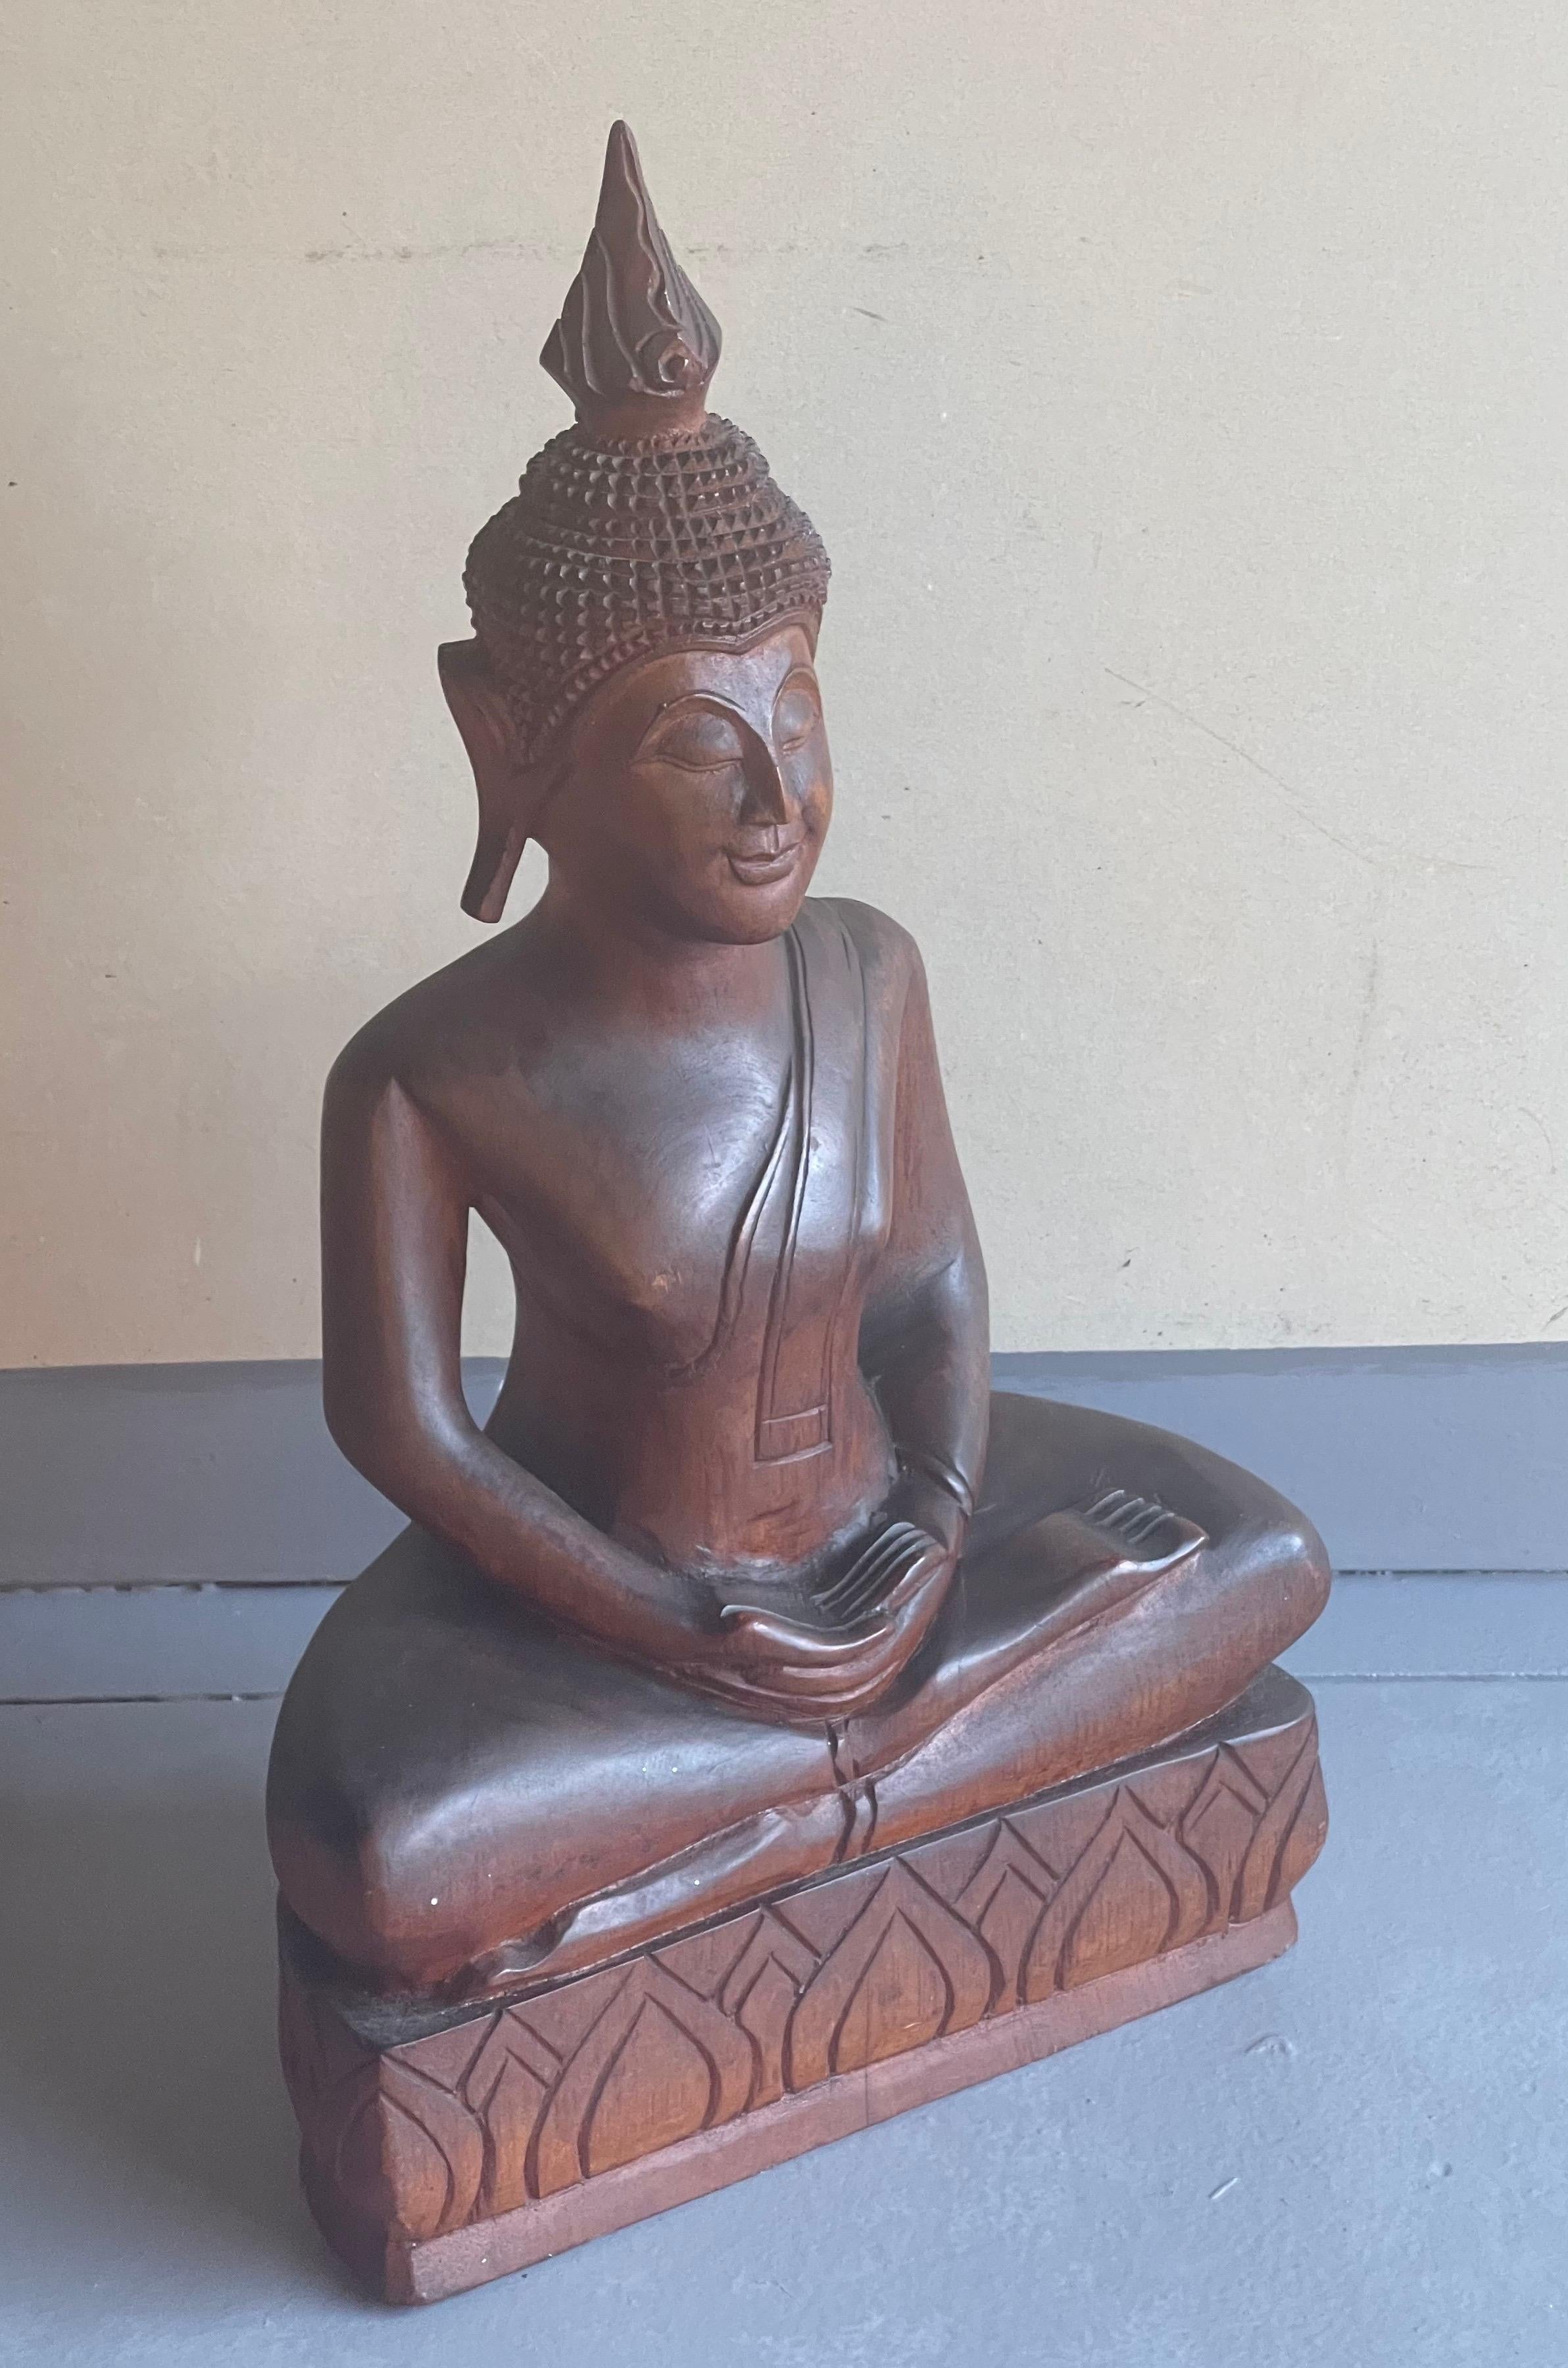 A very cool and impressive hand carved wooden (I beleive mahogany) Buddha from Thailand, circa 1970s. The piece is in very good vintage condition and measures 11.75